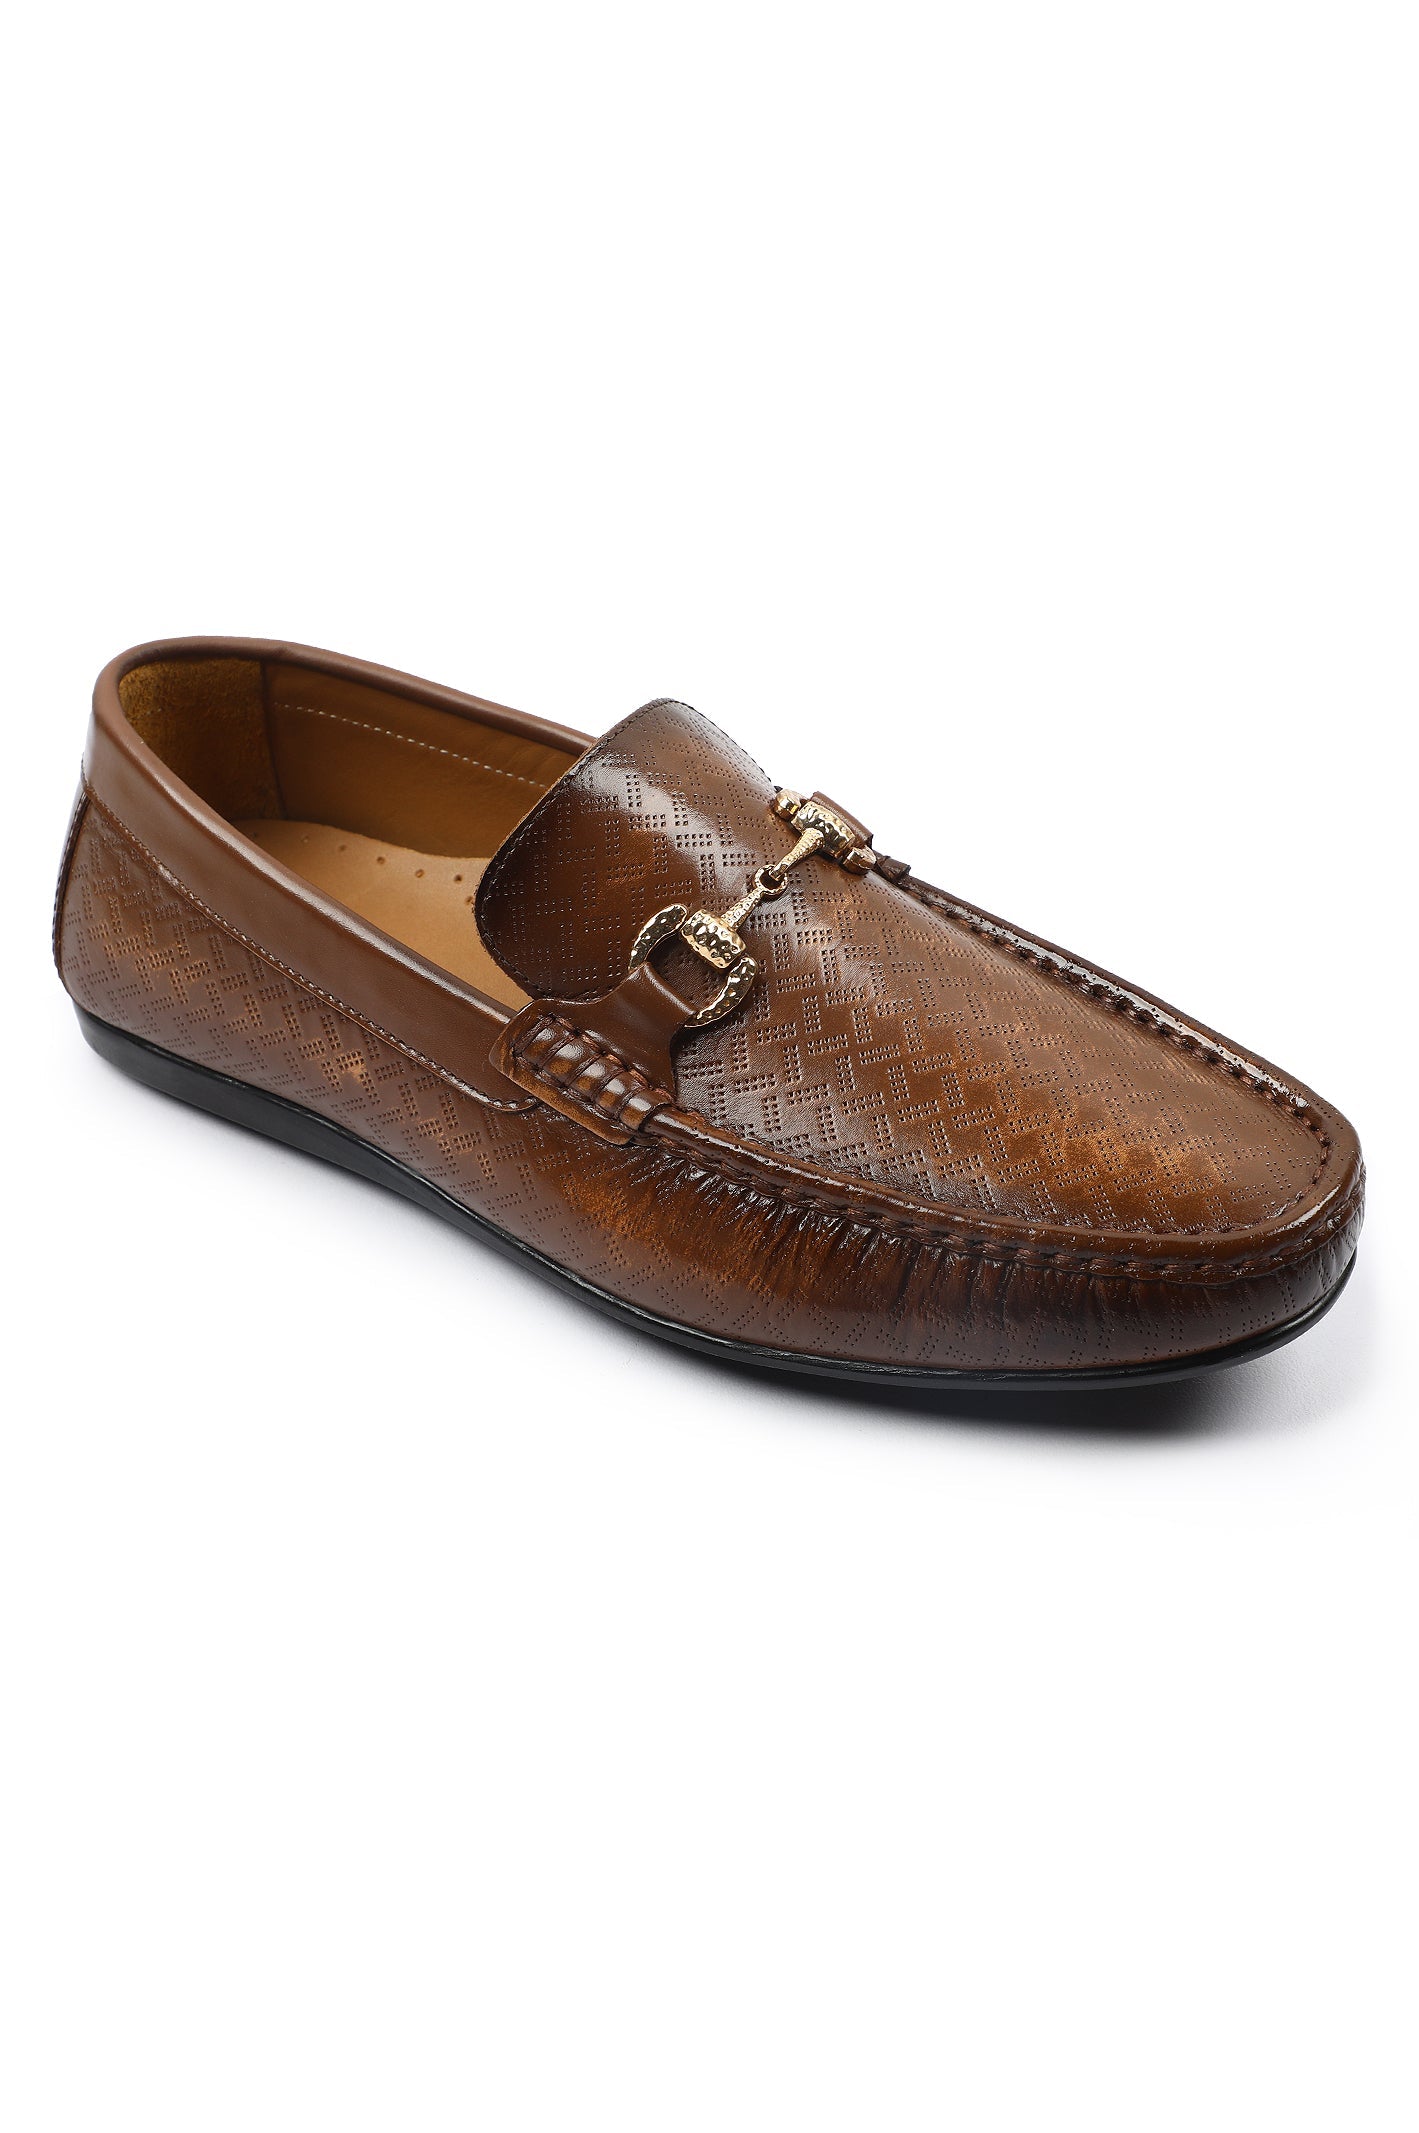 Casual Shoes For Men SKU: SMC-0081-TAN - Diners